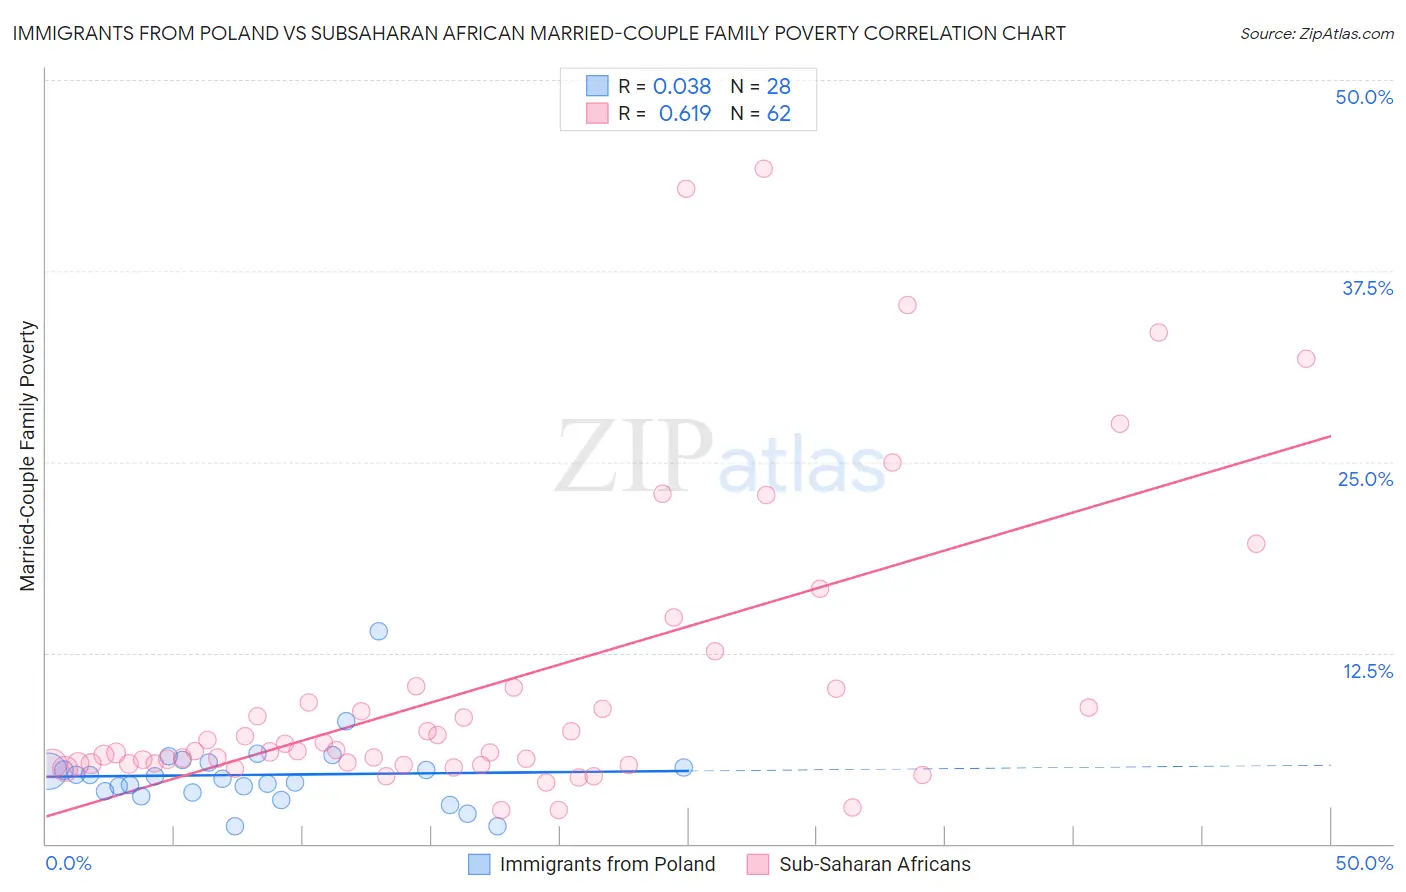 Immigrants from Poland vs Subsaharan African Married-Couple Family Poverty